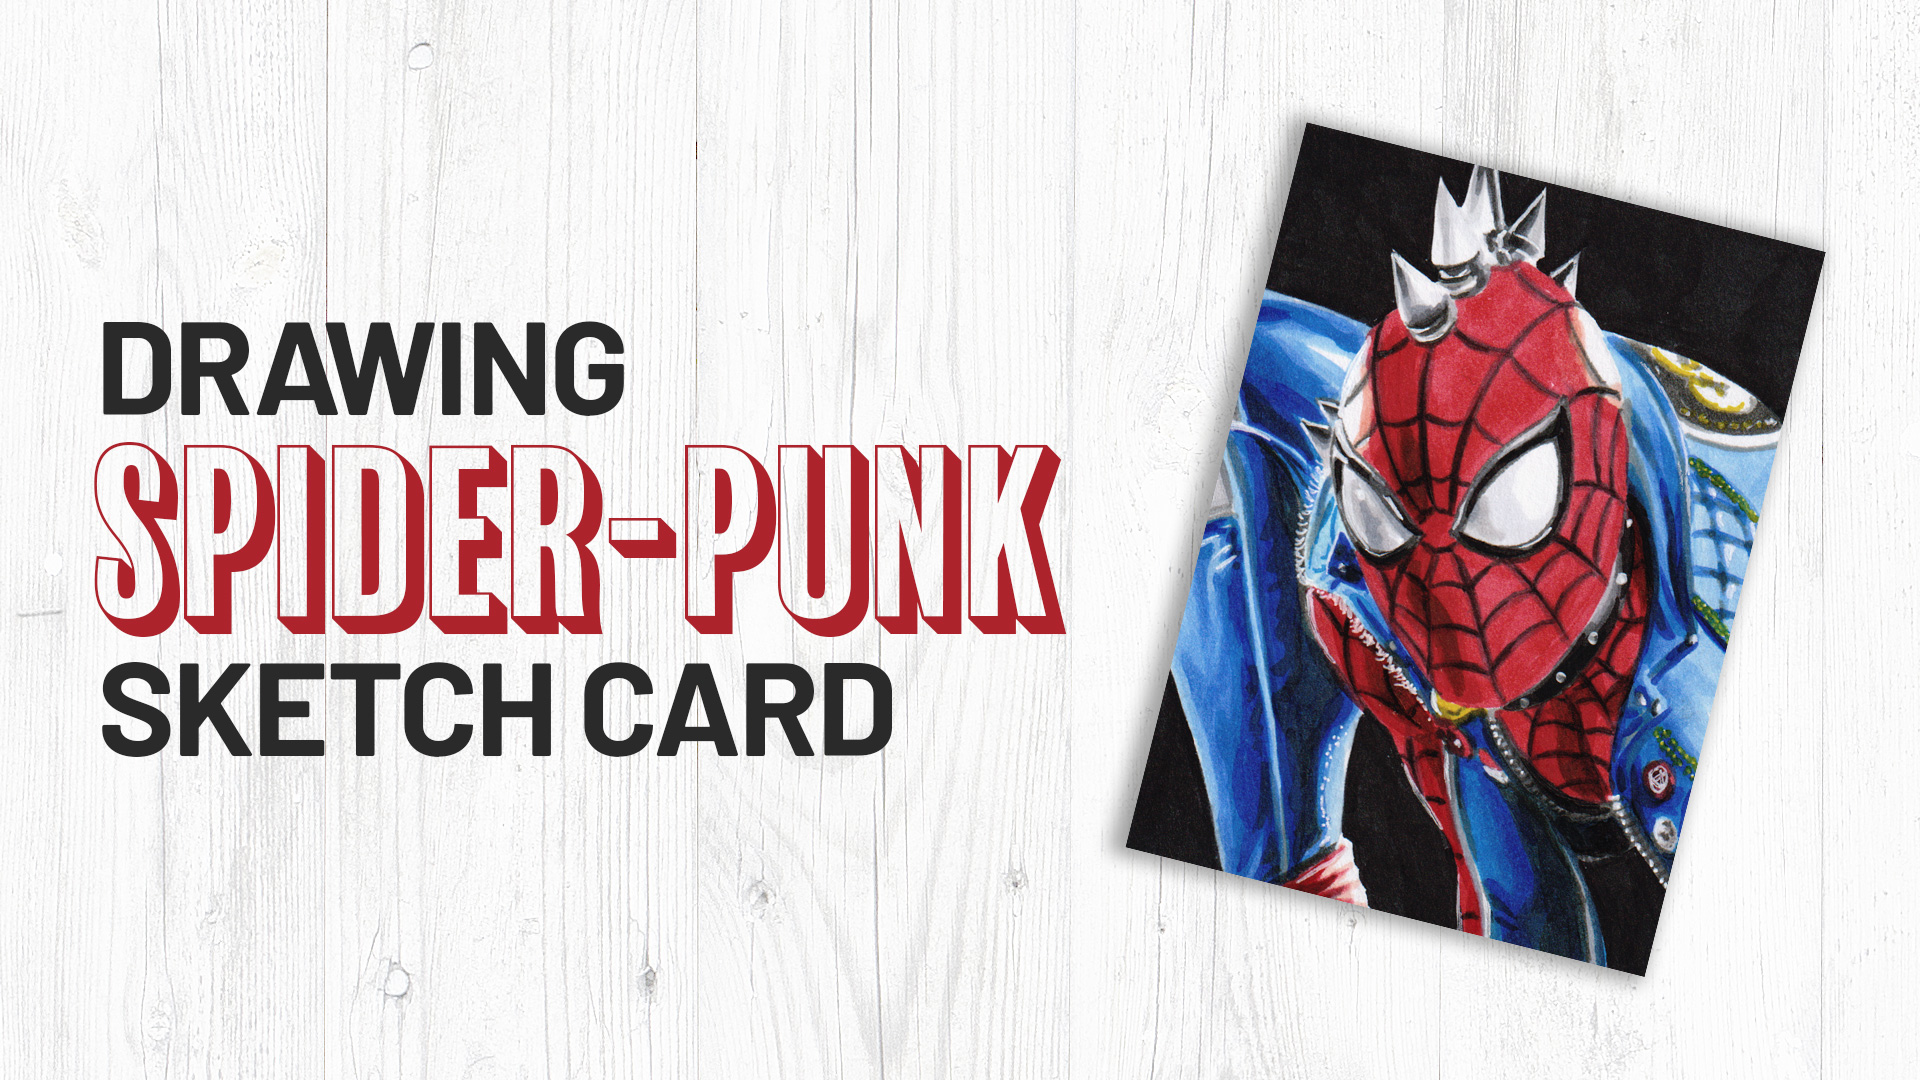 Drawing Spider-Punk Sketch Card by Duke